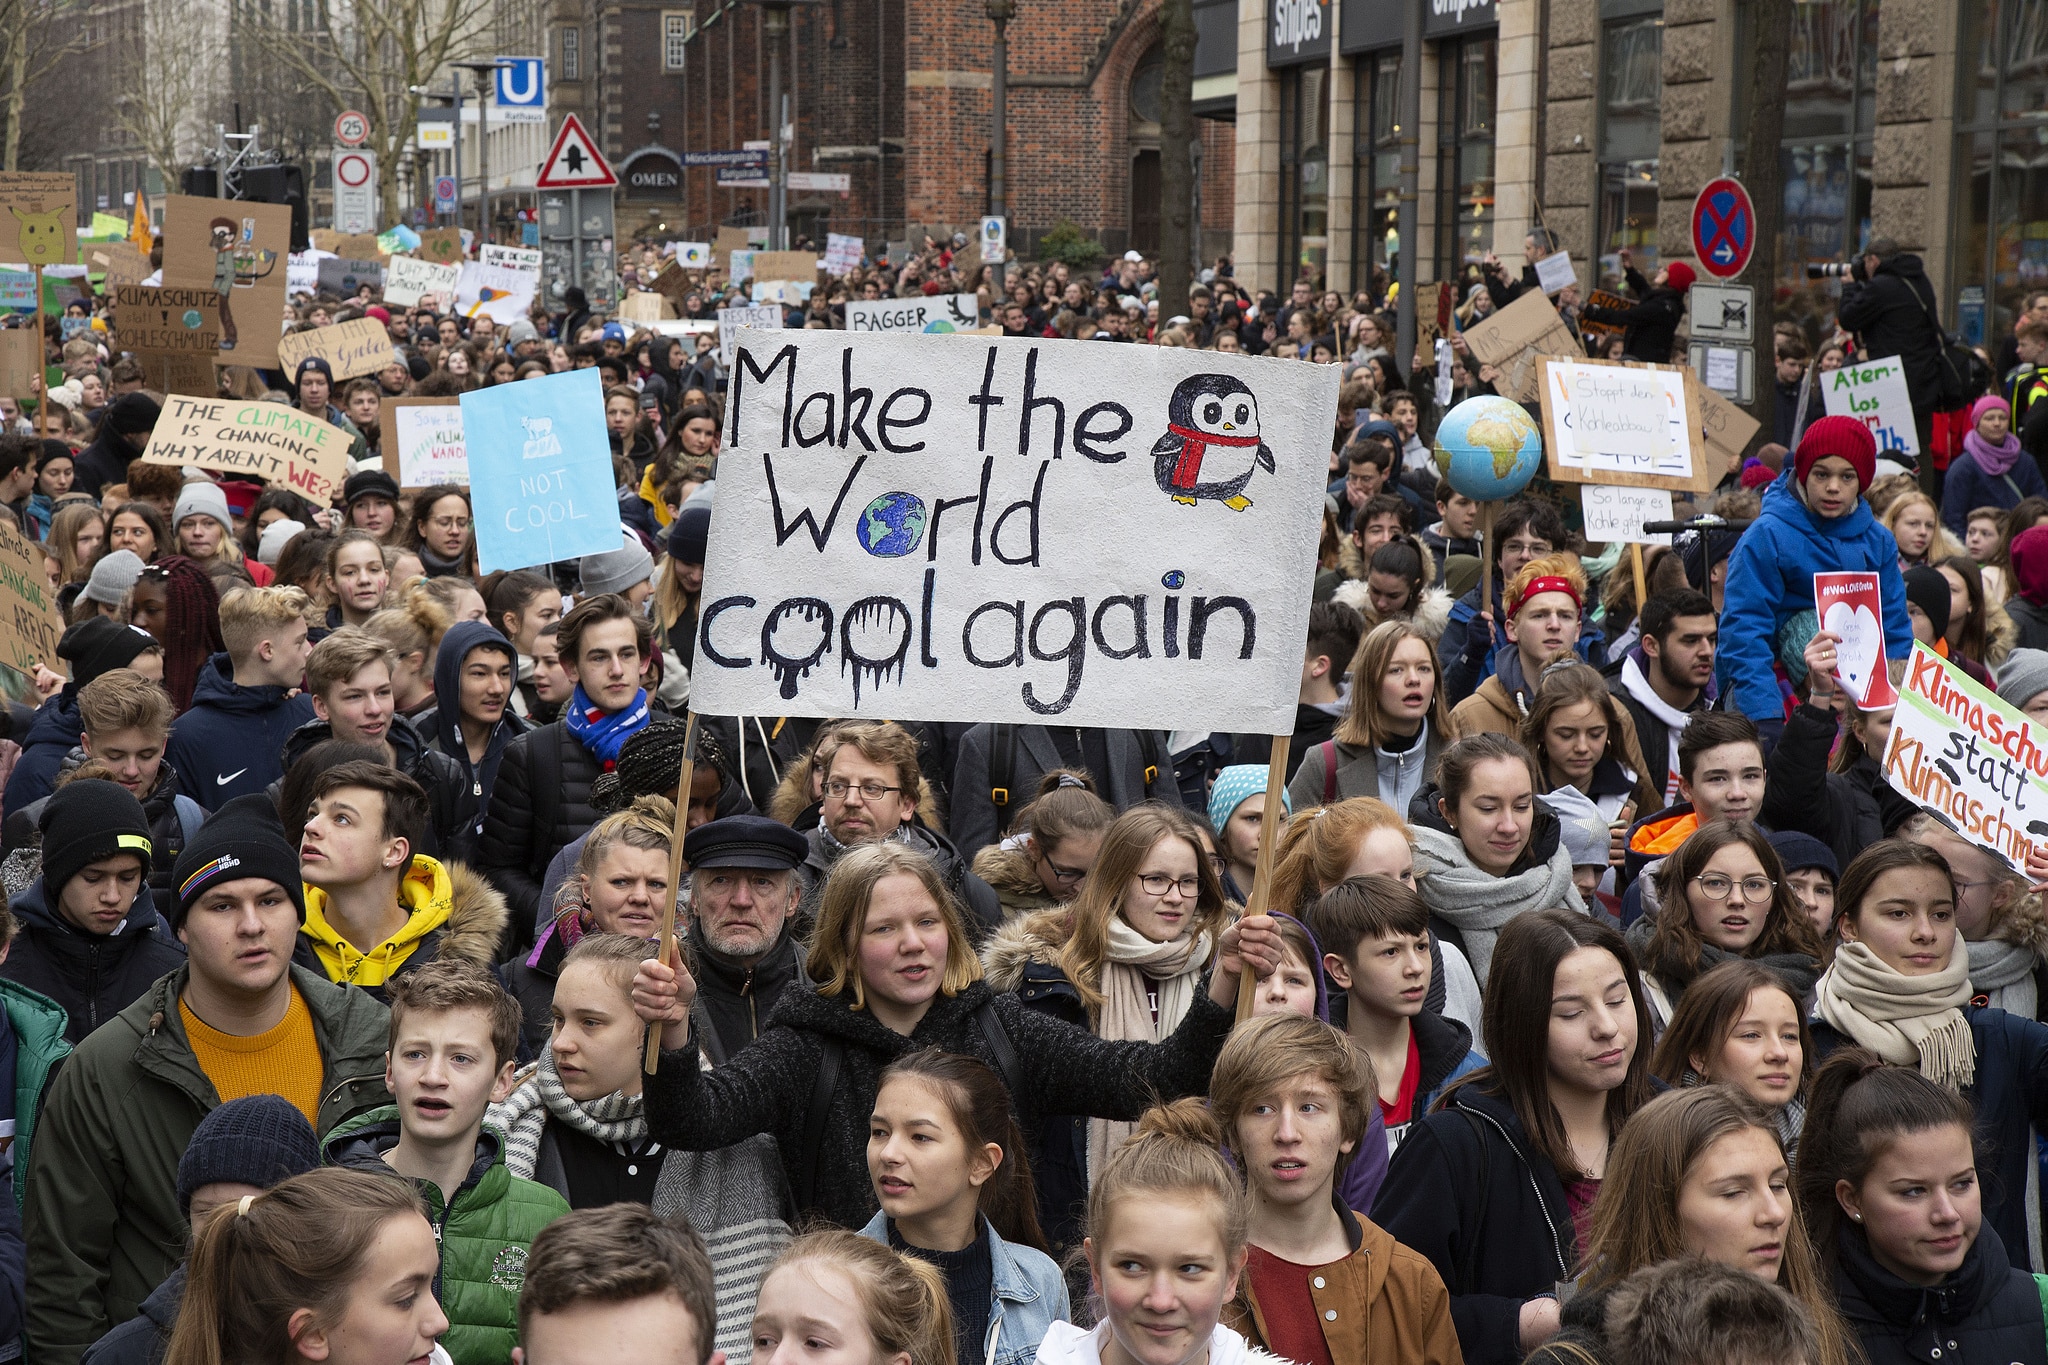 American students will join a global climate strike #FridaysForFuture